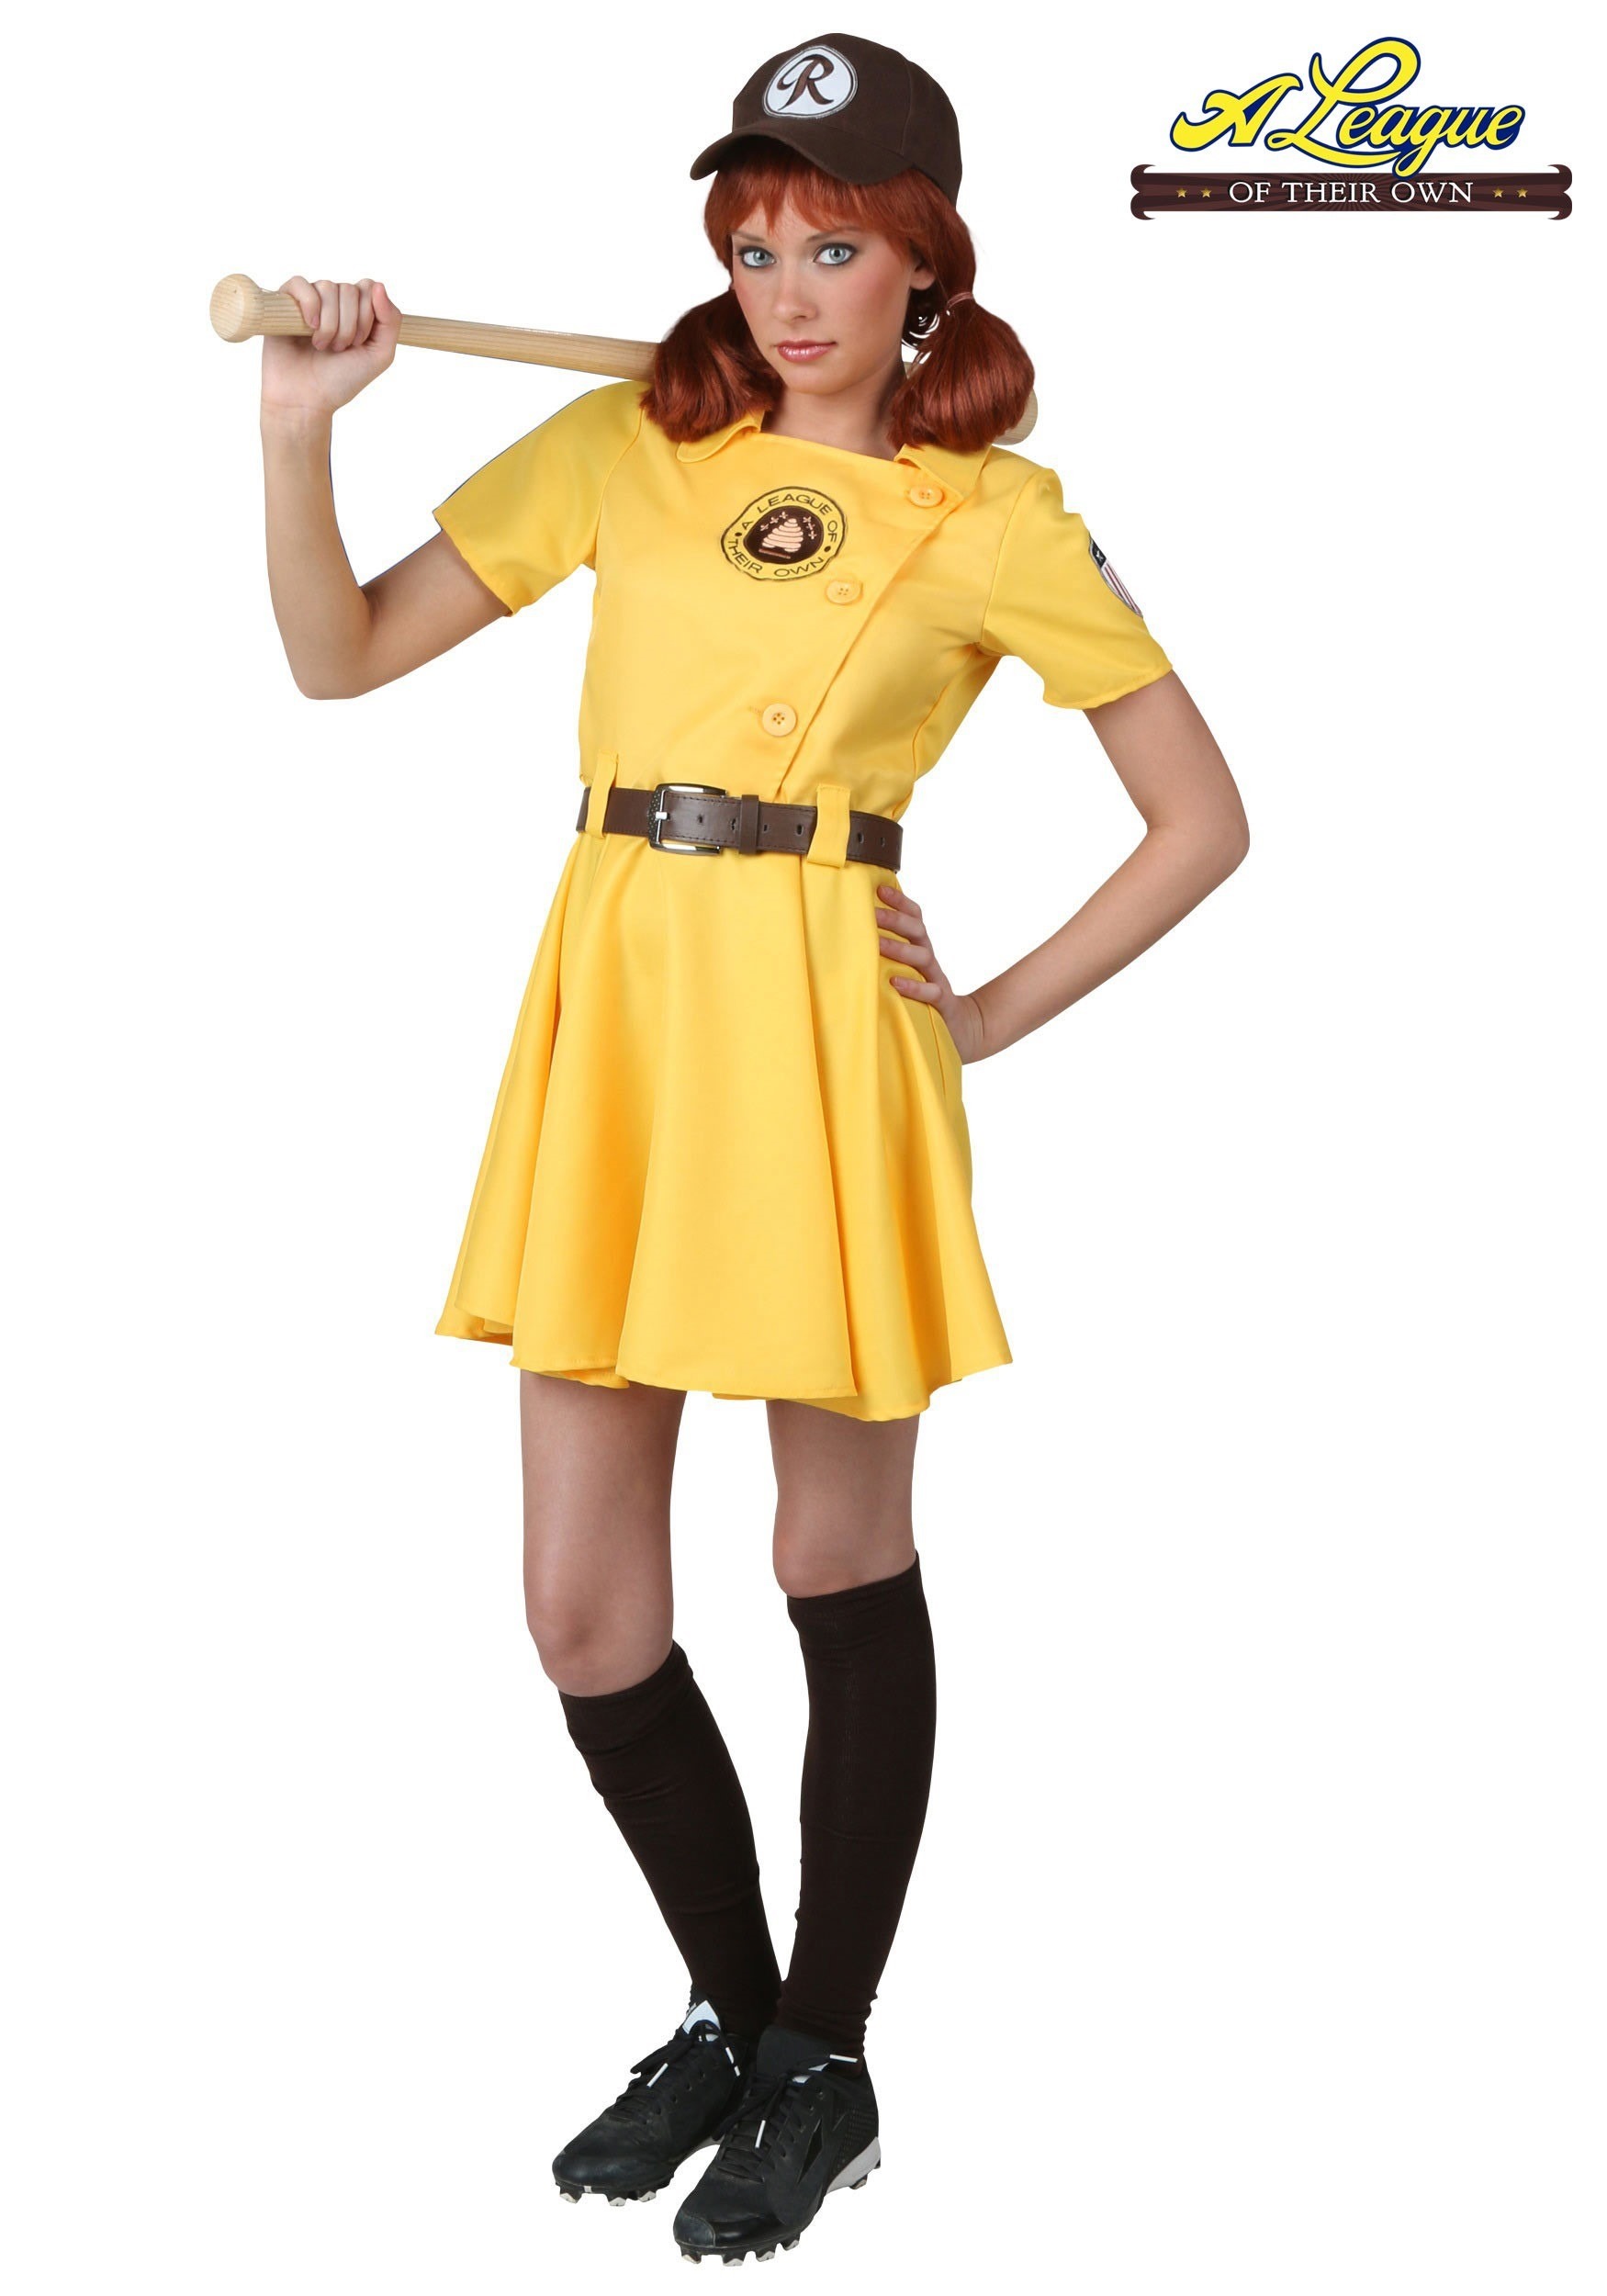 Plus Size A League of Their Own Kit Costume